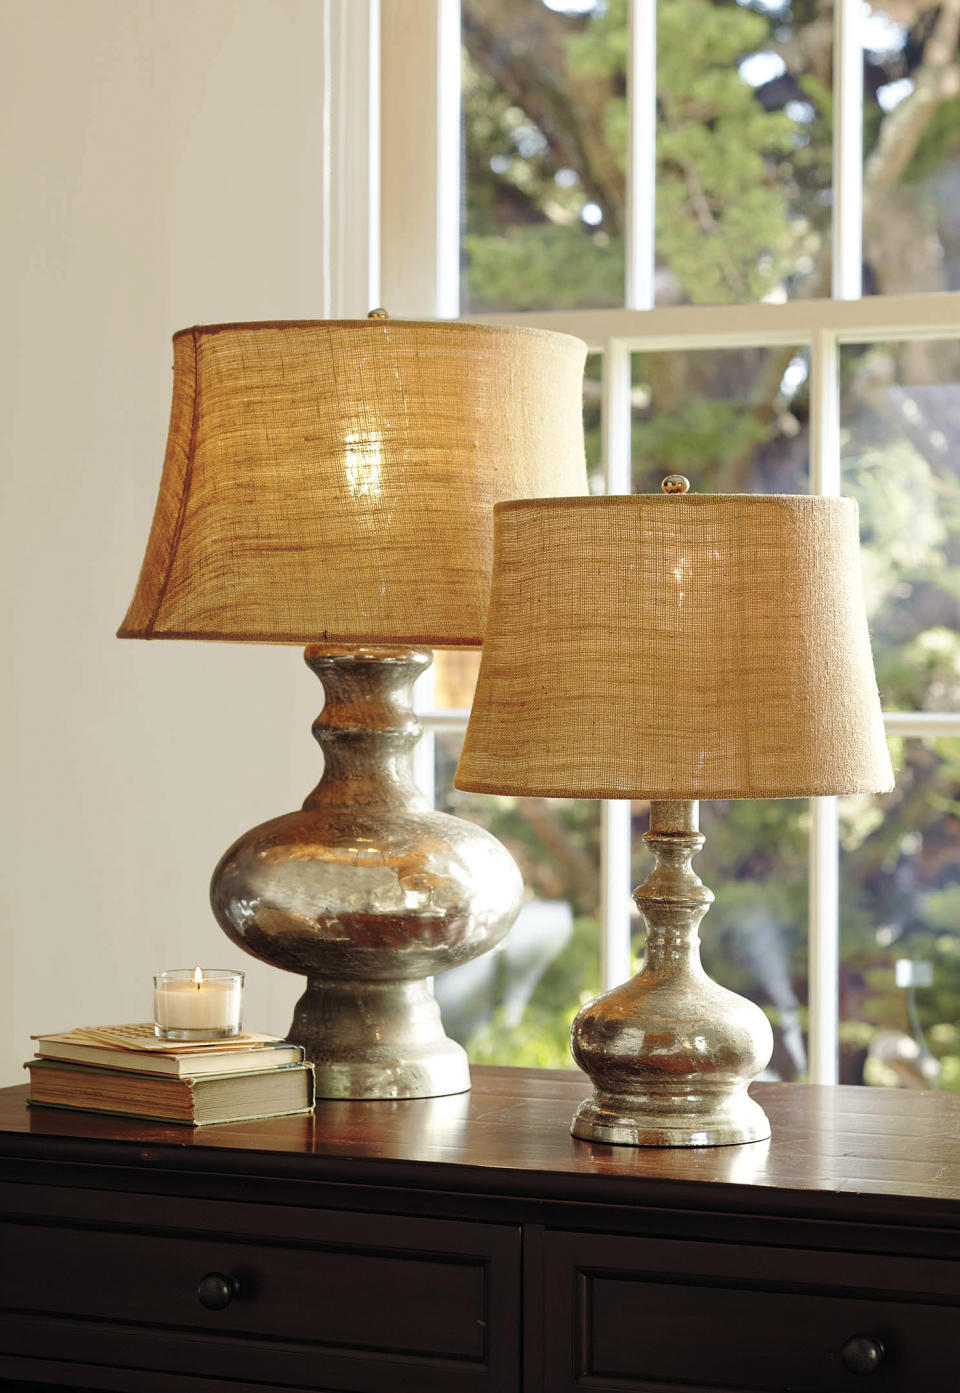 This publicity photo provided by Pottery Barn shows a pair of antique mercury glass lamps. Mercury glass, antiqued or in new hues like copper, grey or slate blue, continues to hold strong for fall. You’ll see it in wall panels, vases, boxes and lamps like these from Pottery Barn.com. (AP Photo/Pottery Barn, John Merkl, Matt Sartain)